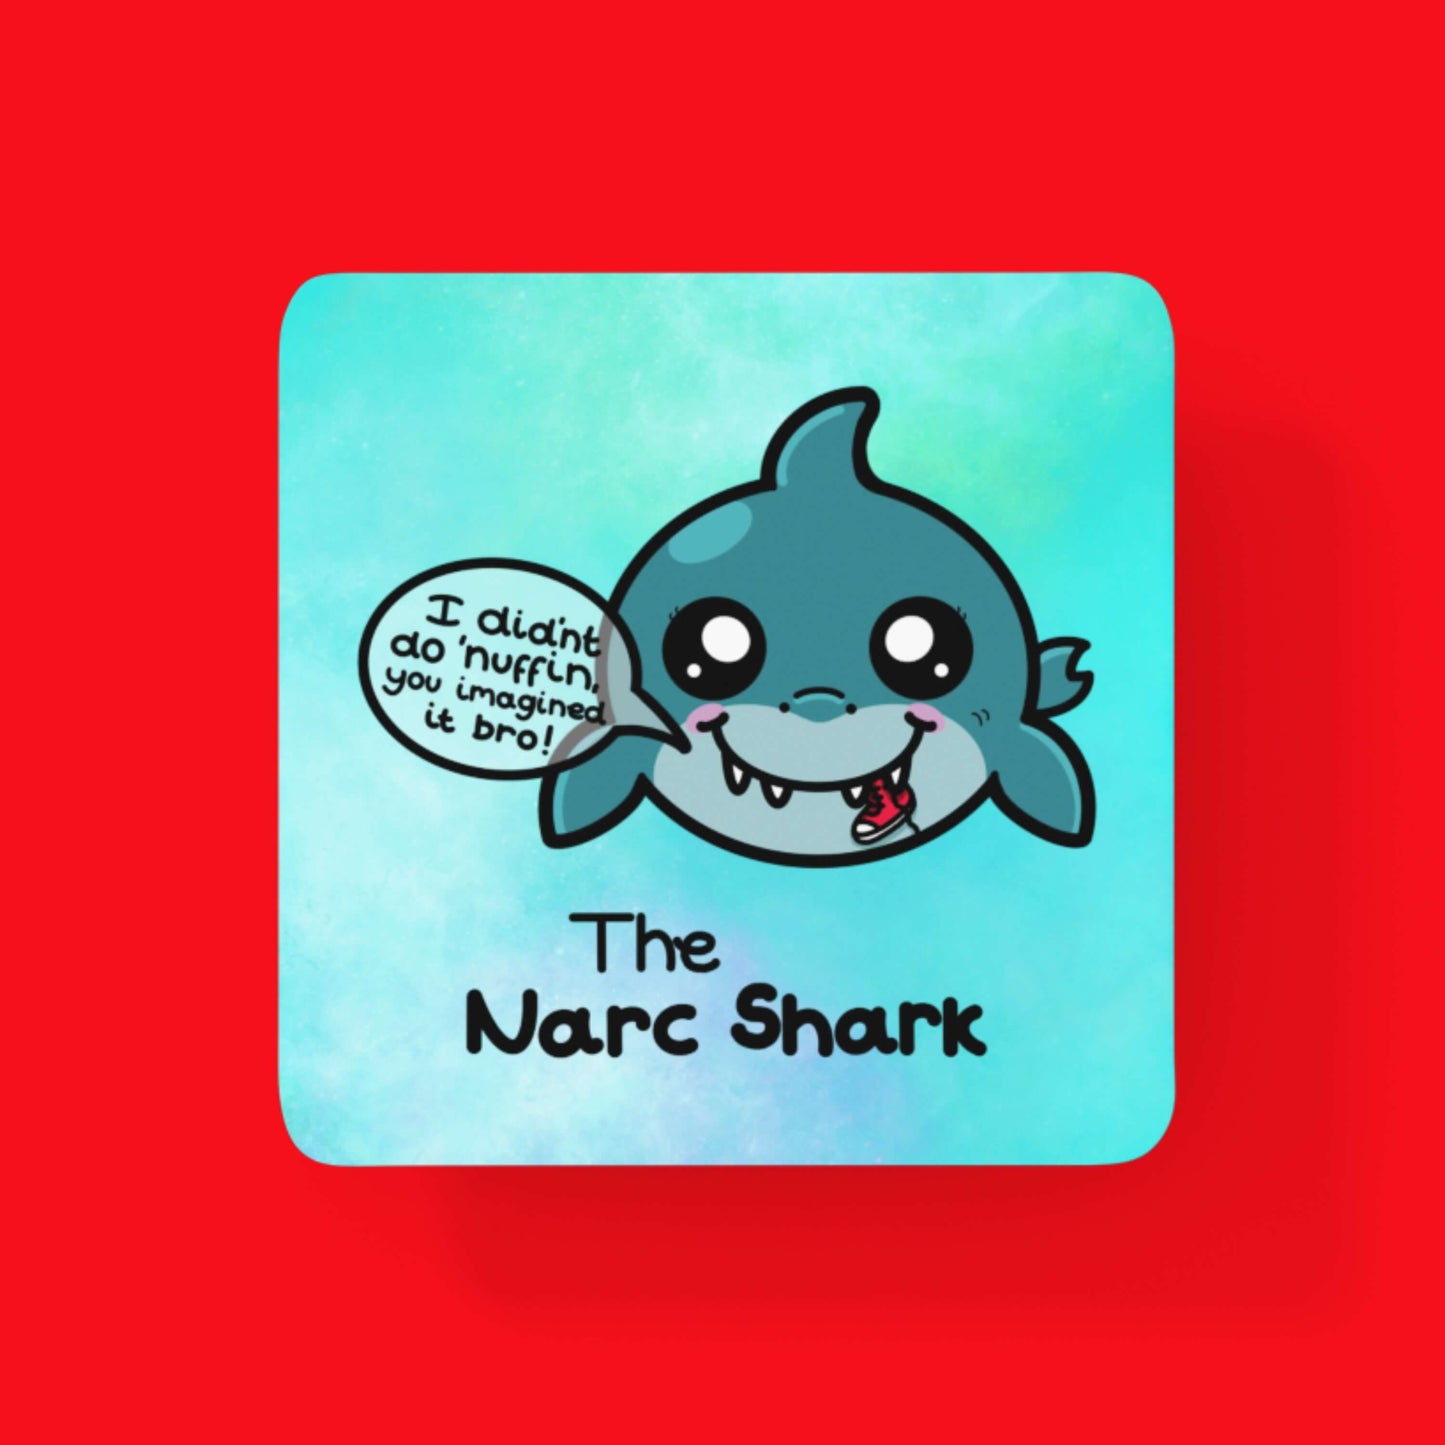 The Narc Shark Coaster - Narcissism on a red background. The blue wooden coaster features a blushing smiling blue shark chewing a red shoe and a speech bubble reading 'I didn't do 'nuffin, you imagined it bro!'. Underneath the great white shark is black text that reads 'the narc shark'. Design is raising awareness for narcissistic abuse.